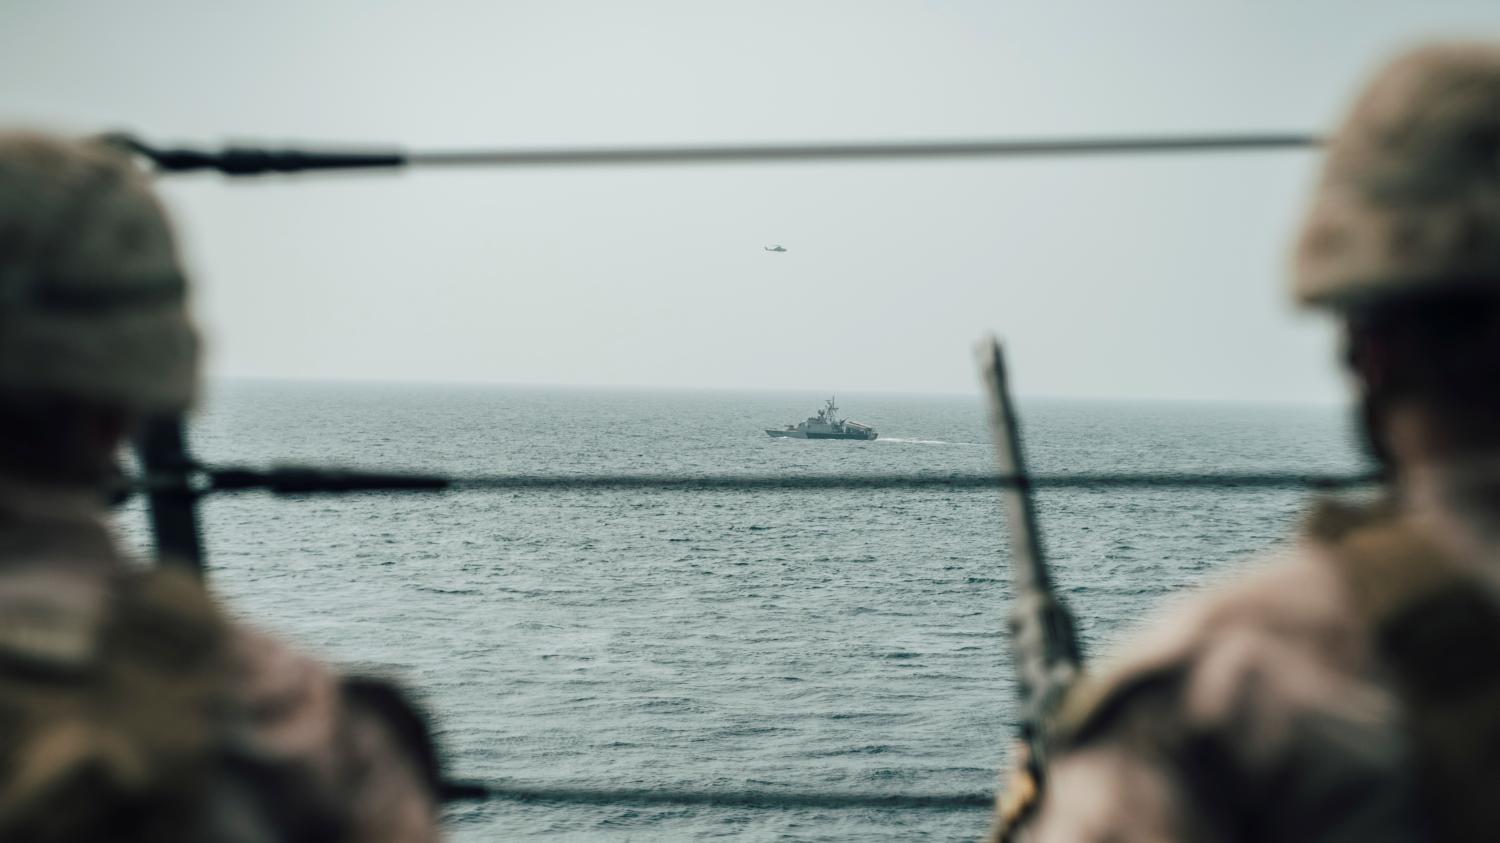 U.S. Marines observe an Iranian fast attack craft from USS John P. Murtha during a Strait of Hormuz transit, Arabian Sea off Oman, in this picture released on July 18, 2019. Donald Holbert/U.S. Navy/Handout via REUTERS ATTENTION EDITORS- THIS IMAGE HAS BEEN SUPPLIED BY A THIRD PARTY. - RC1FF5621490